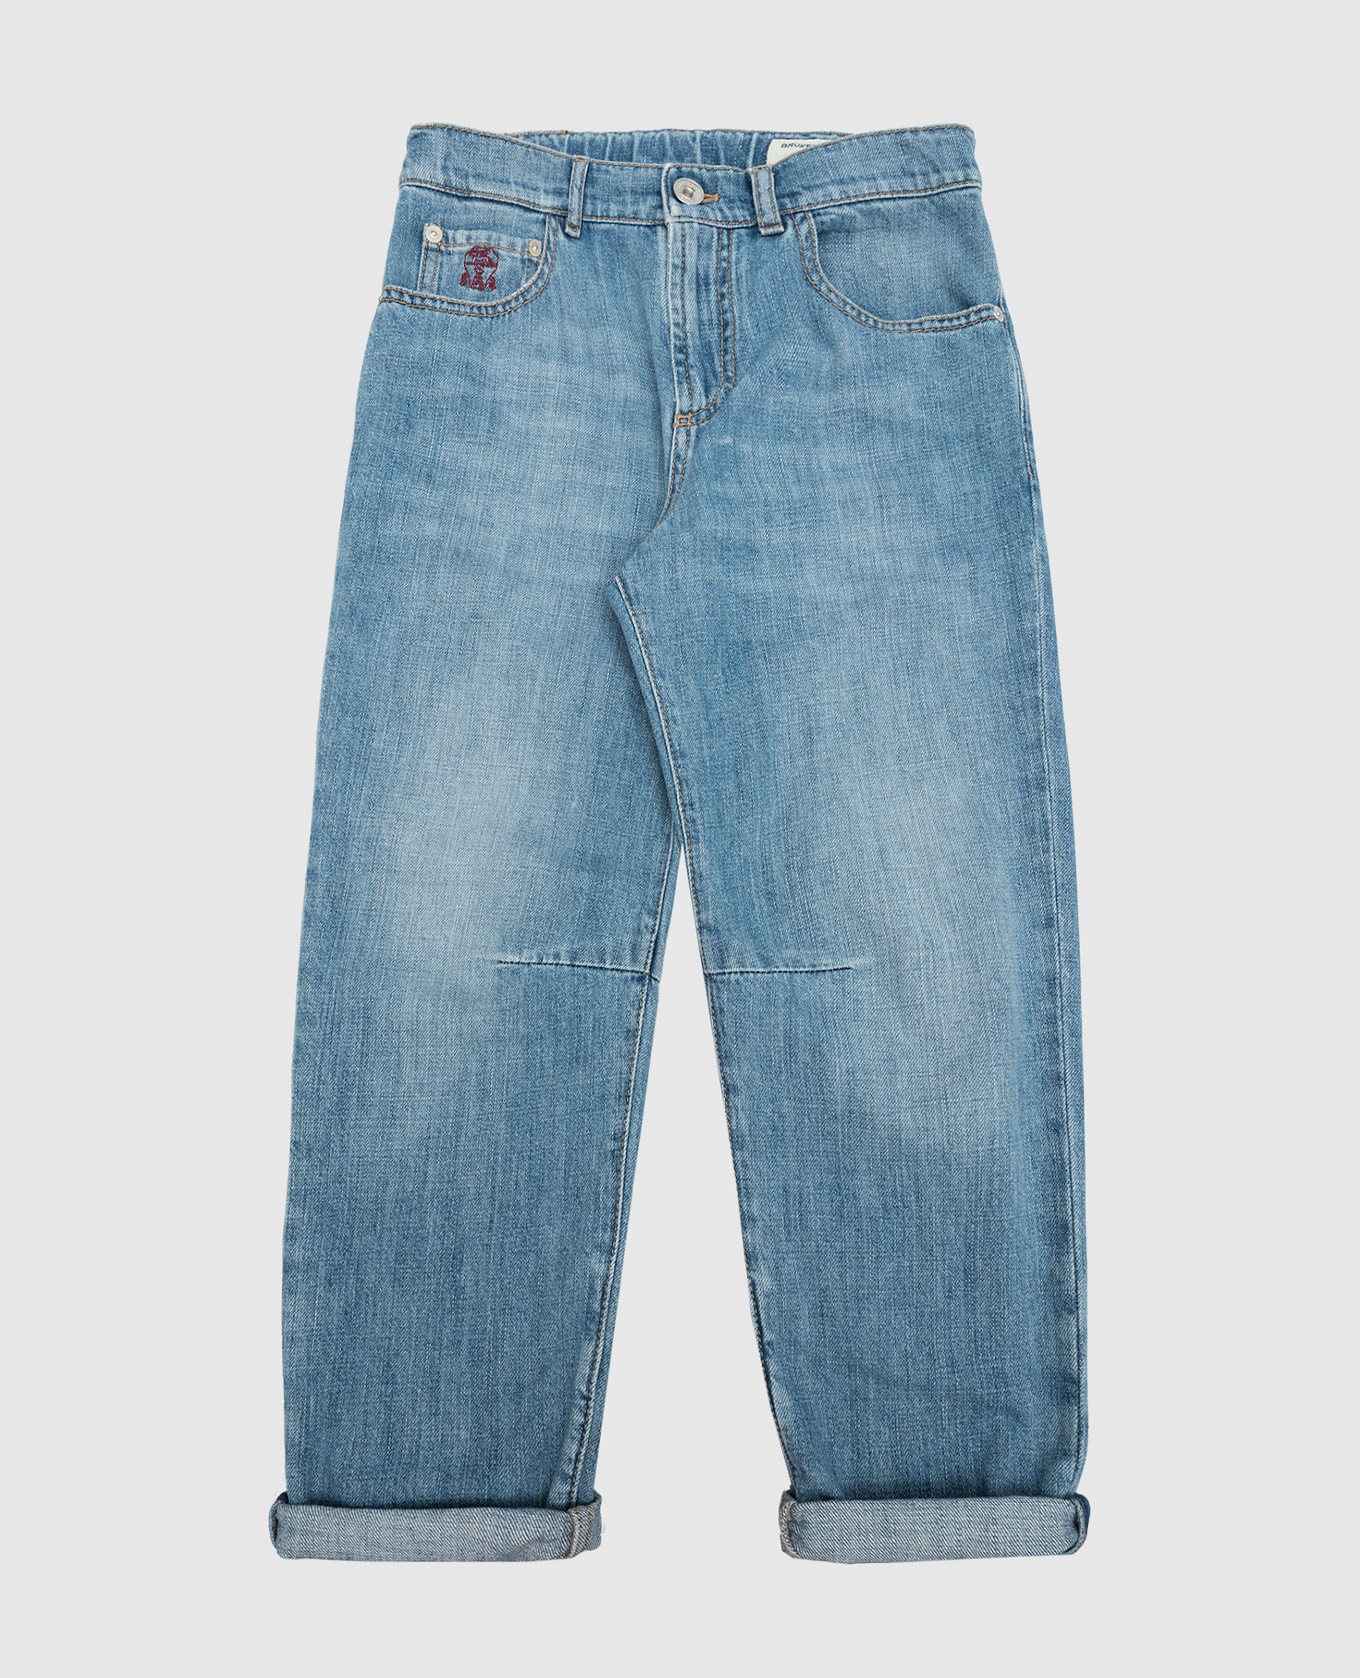 Children's blue jeans with a distressed effect